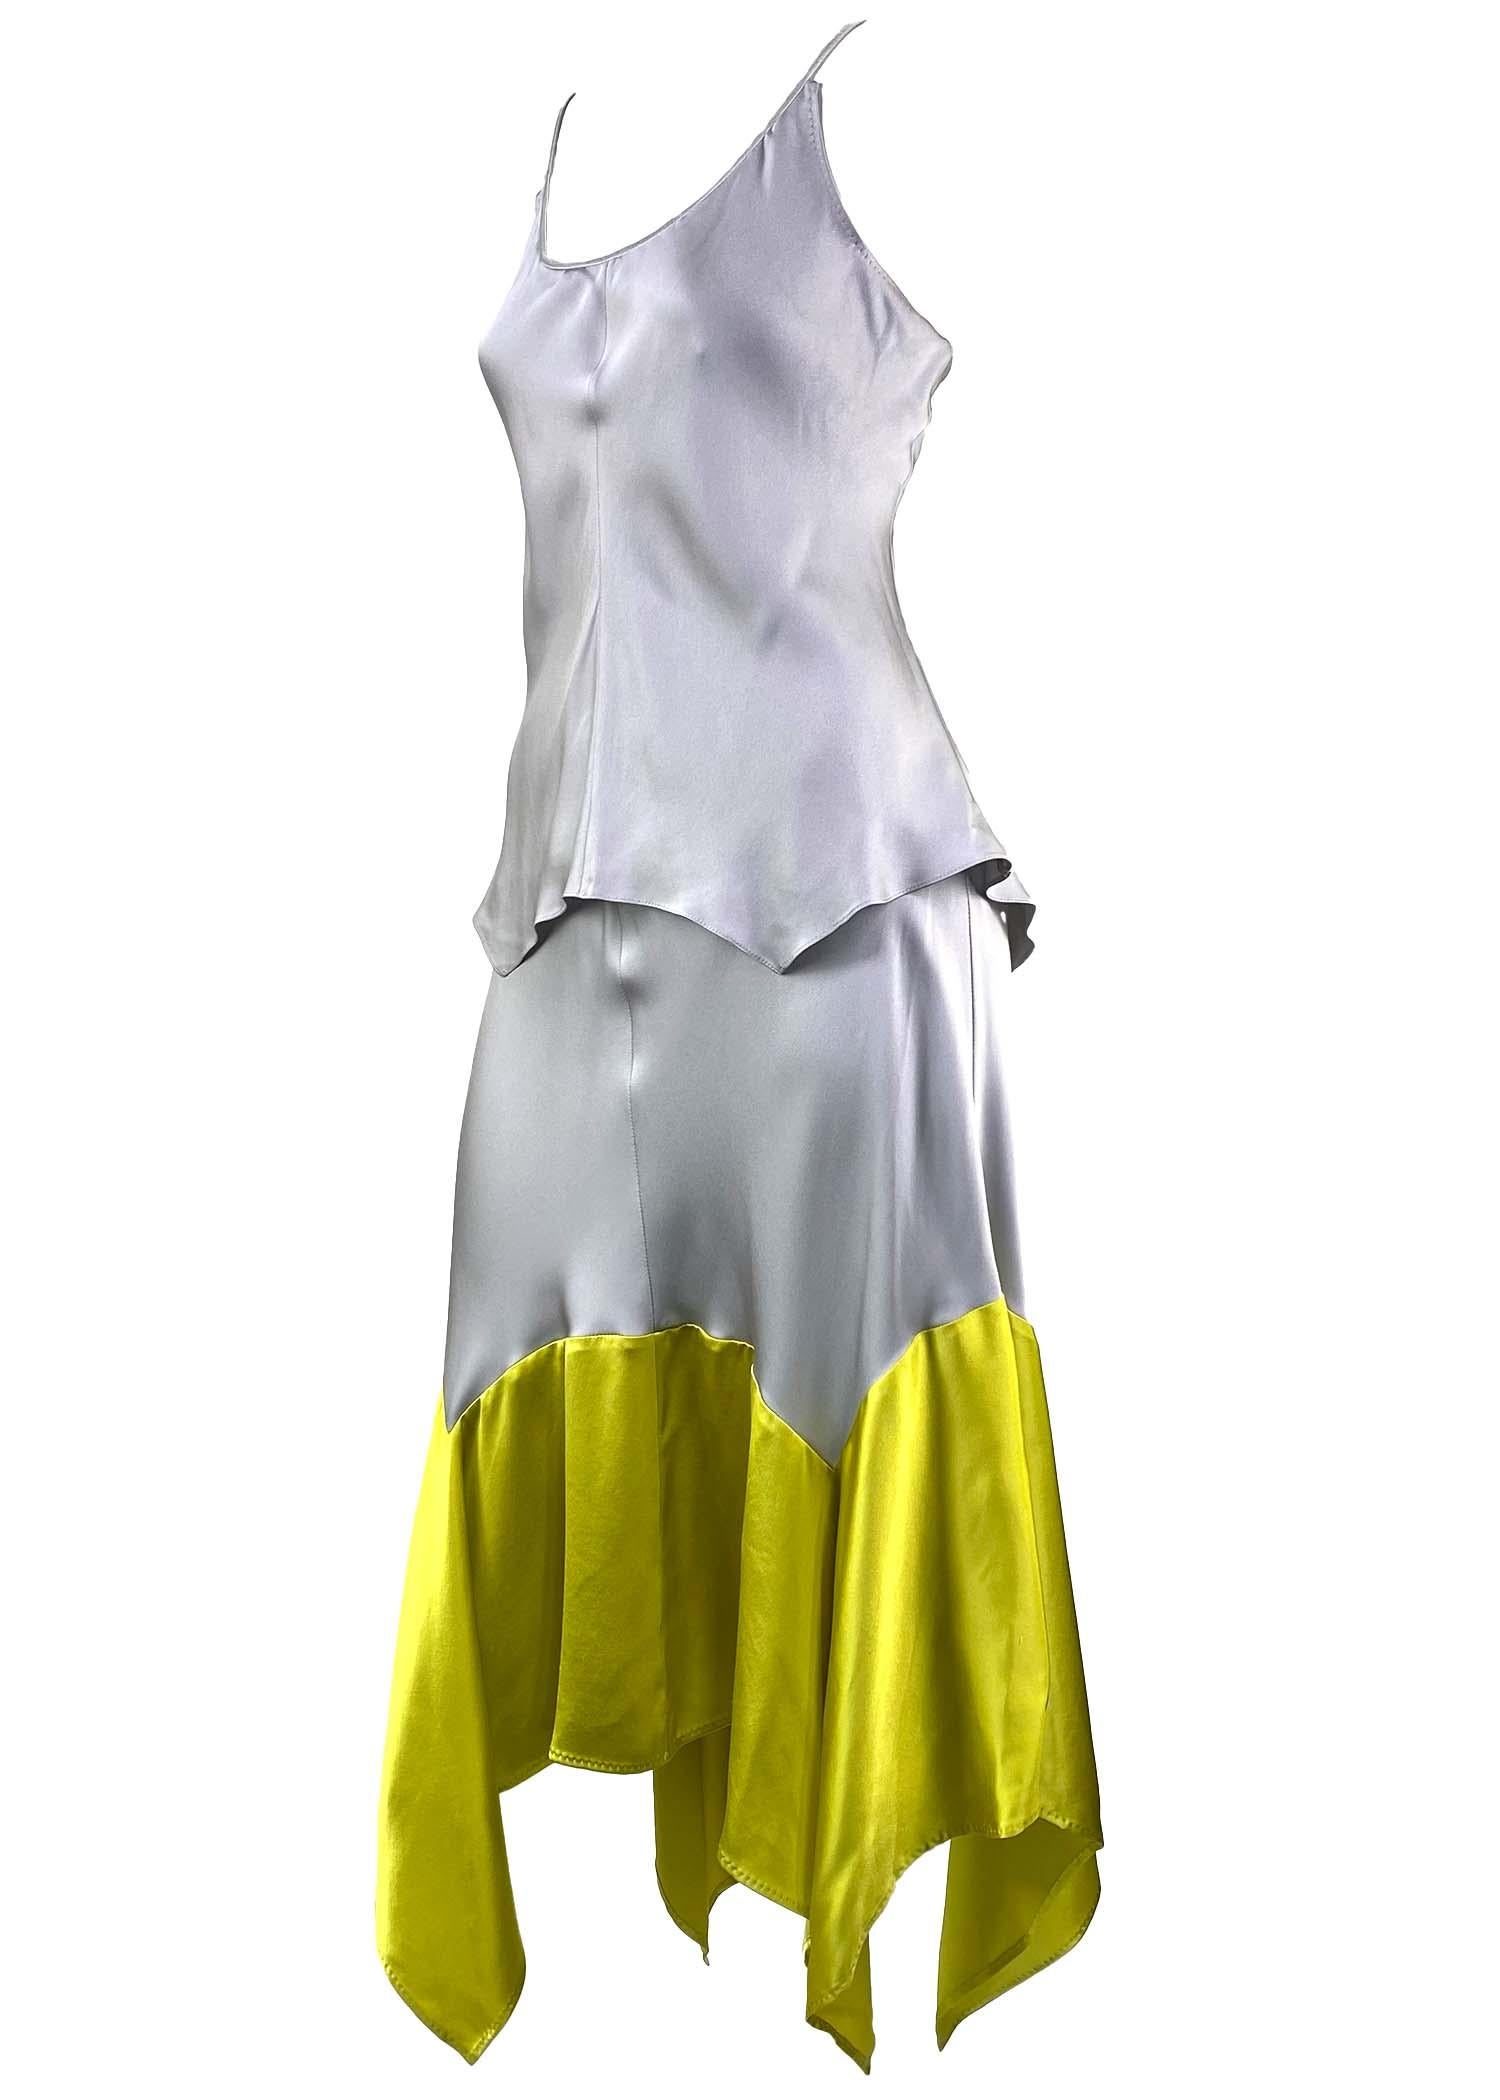 NWT S/S 2004 Yves Saint Laurent by Tom Ford Yellow Grey Handkerchief Dress For Sale 1